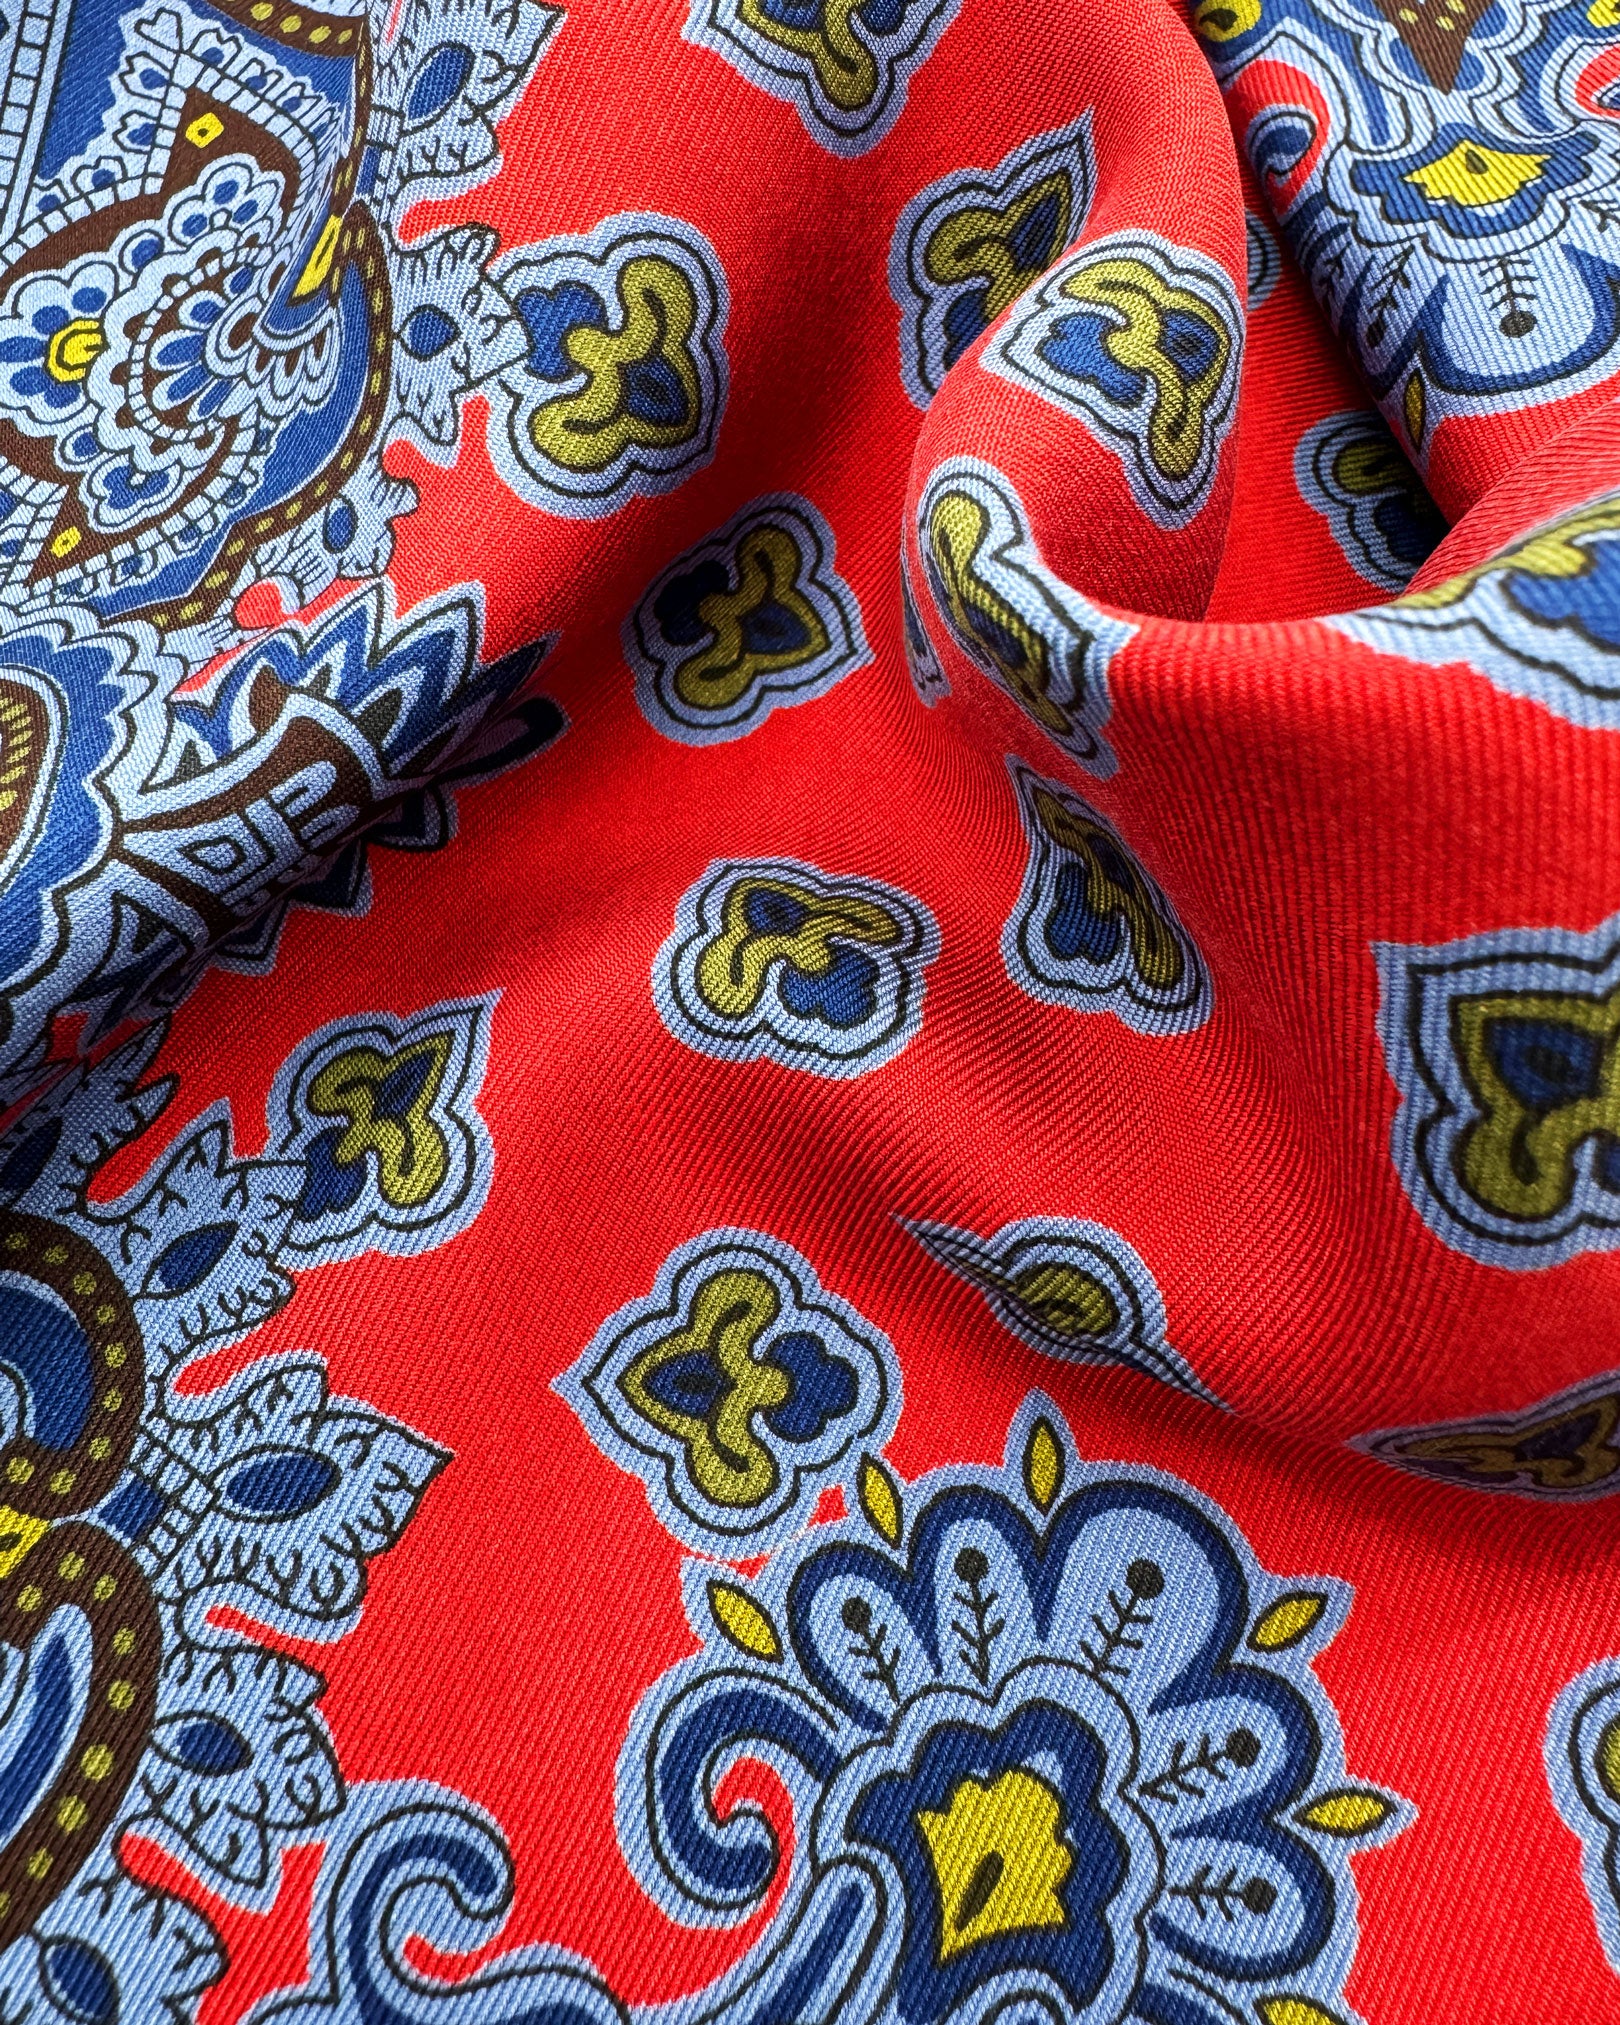 A ruffled close-up of the 'Aldborough' pocket square, presenting a closer view of the miniature fleur-de-lis patterns against the attractive lustre of the madder silk material. 